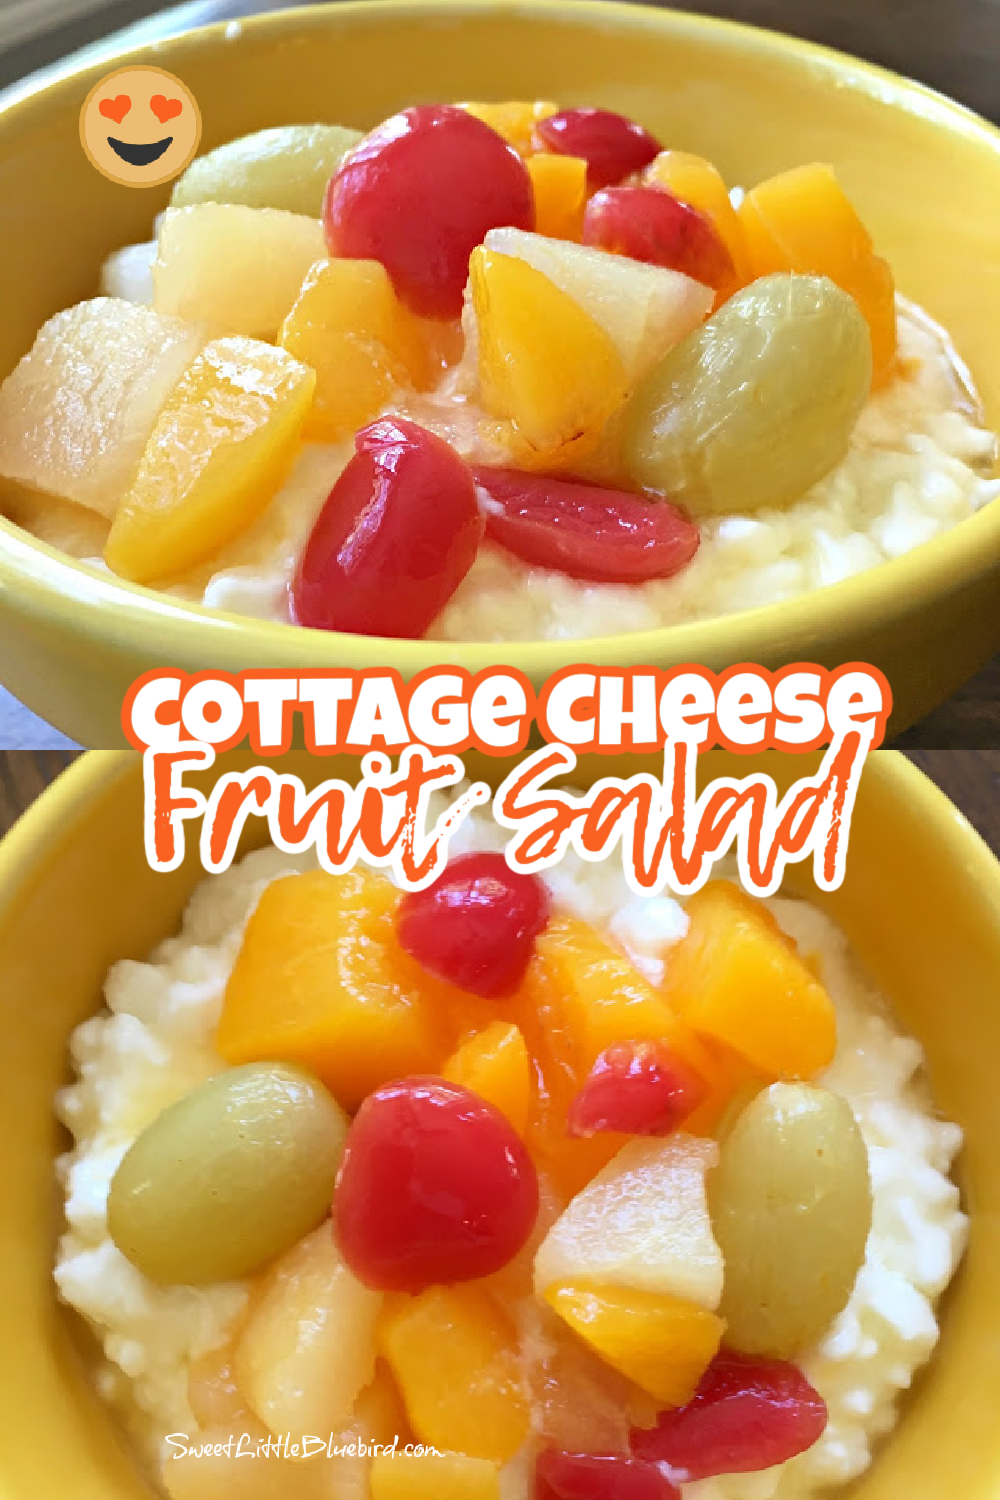 This is a 2 photo collage showing Cottage Cheese Fruit Salad served in a yellow bowl.